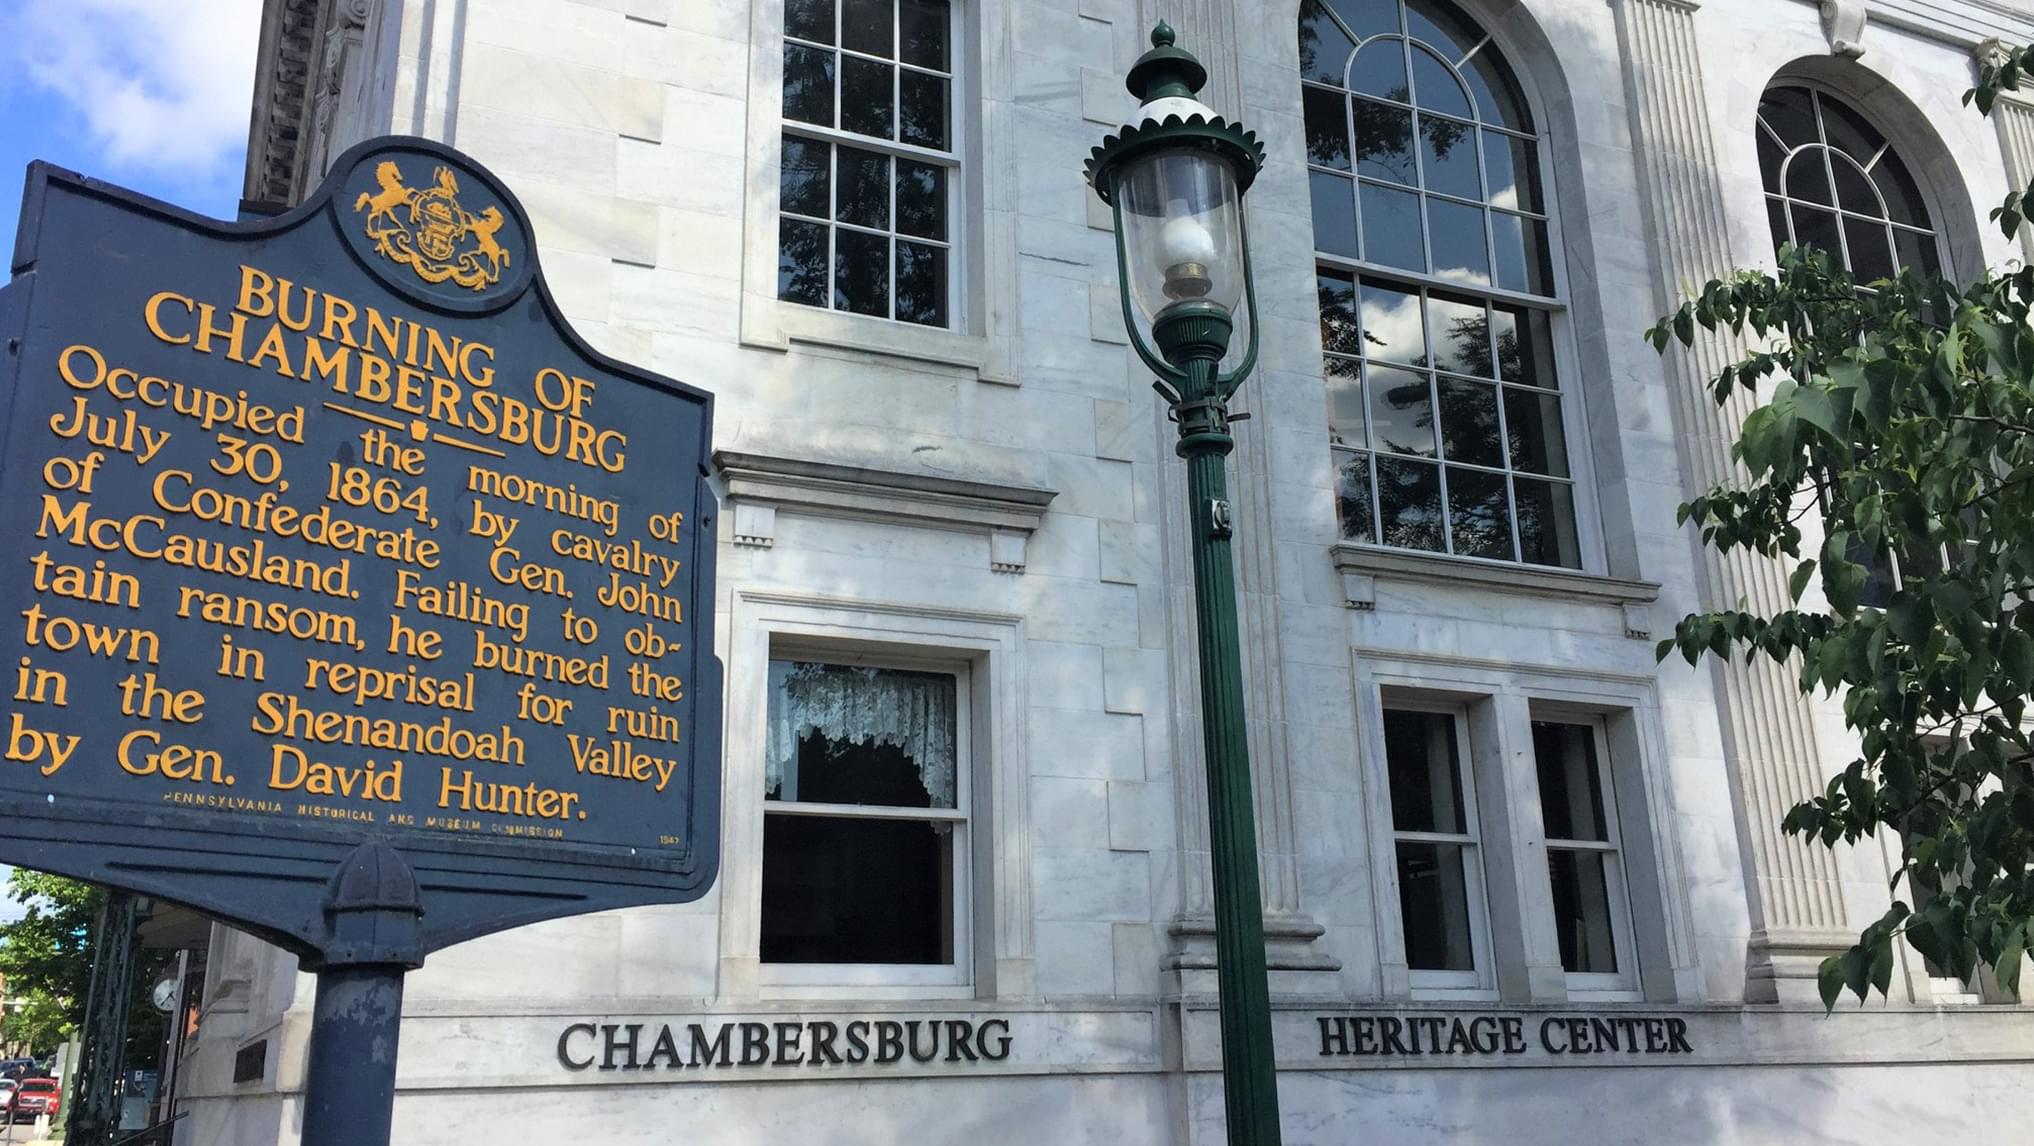 Chambersburg Heritage Center and Gift Shop